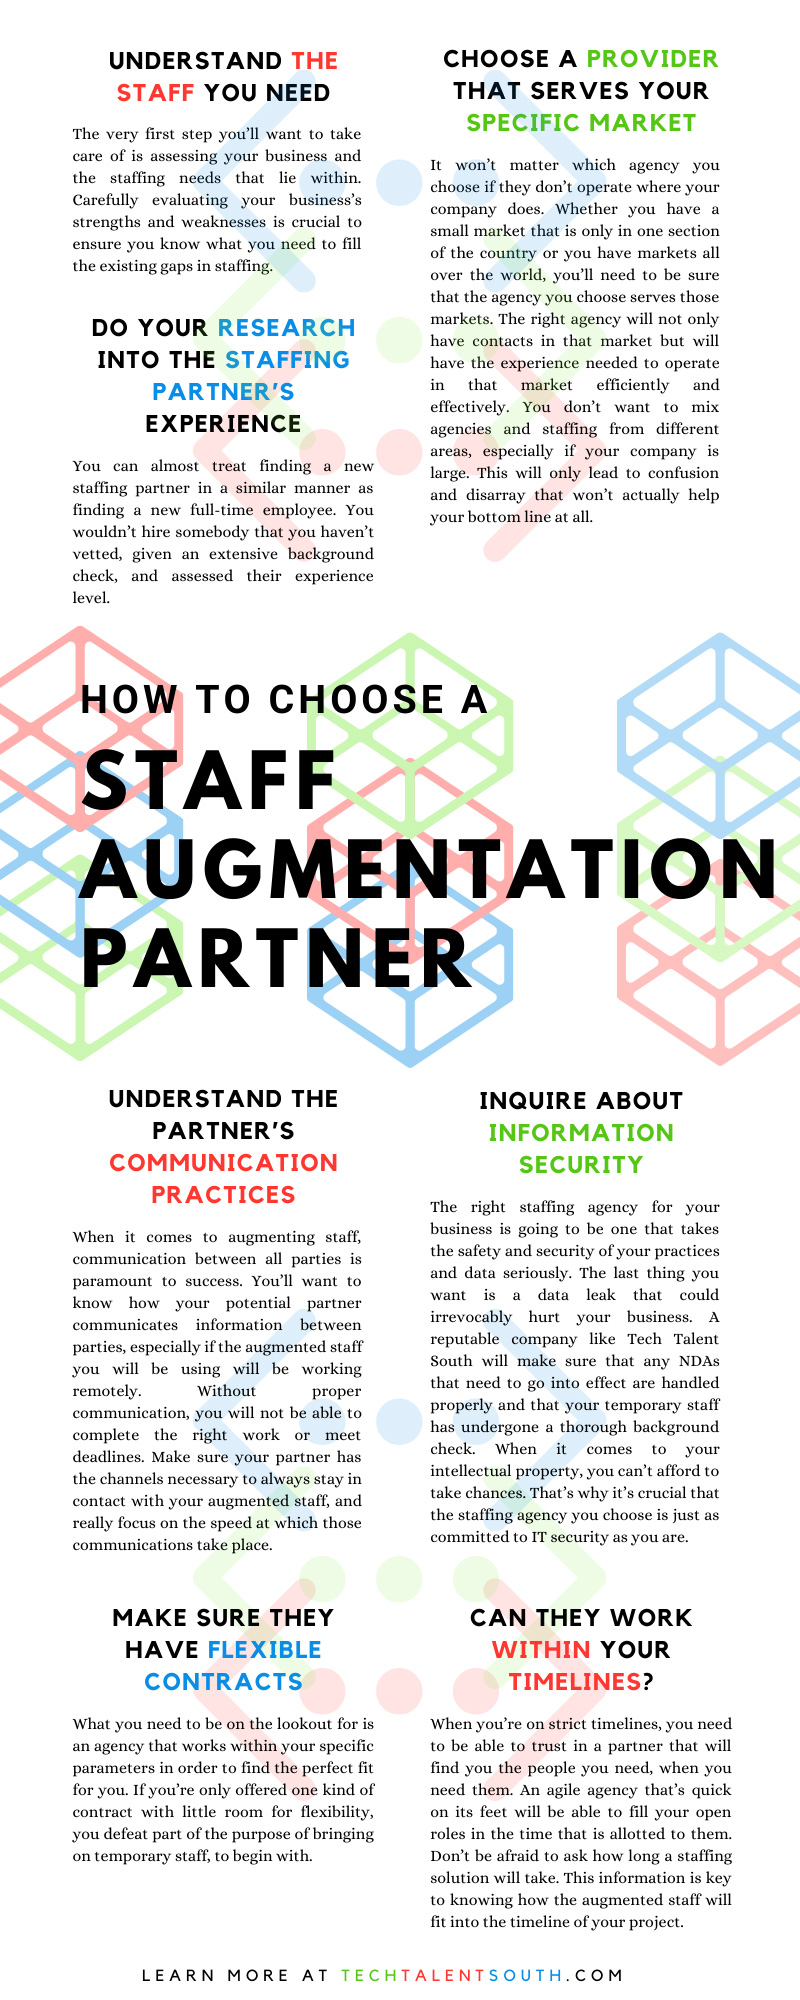 How To Choose a Staff Augmentation Partner